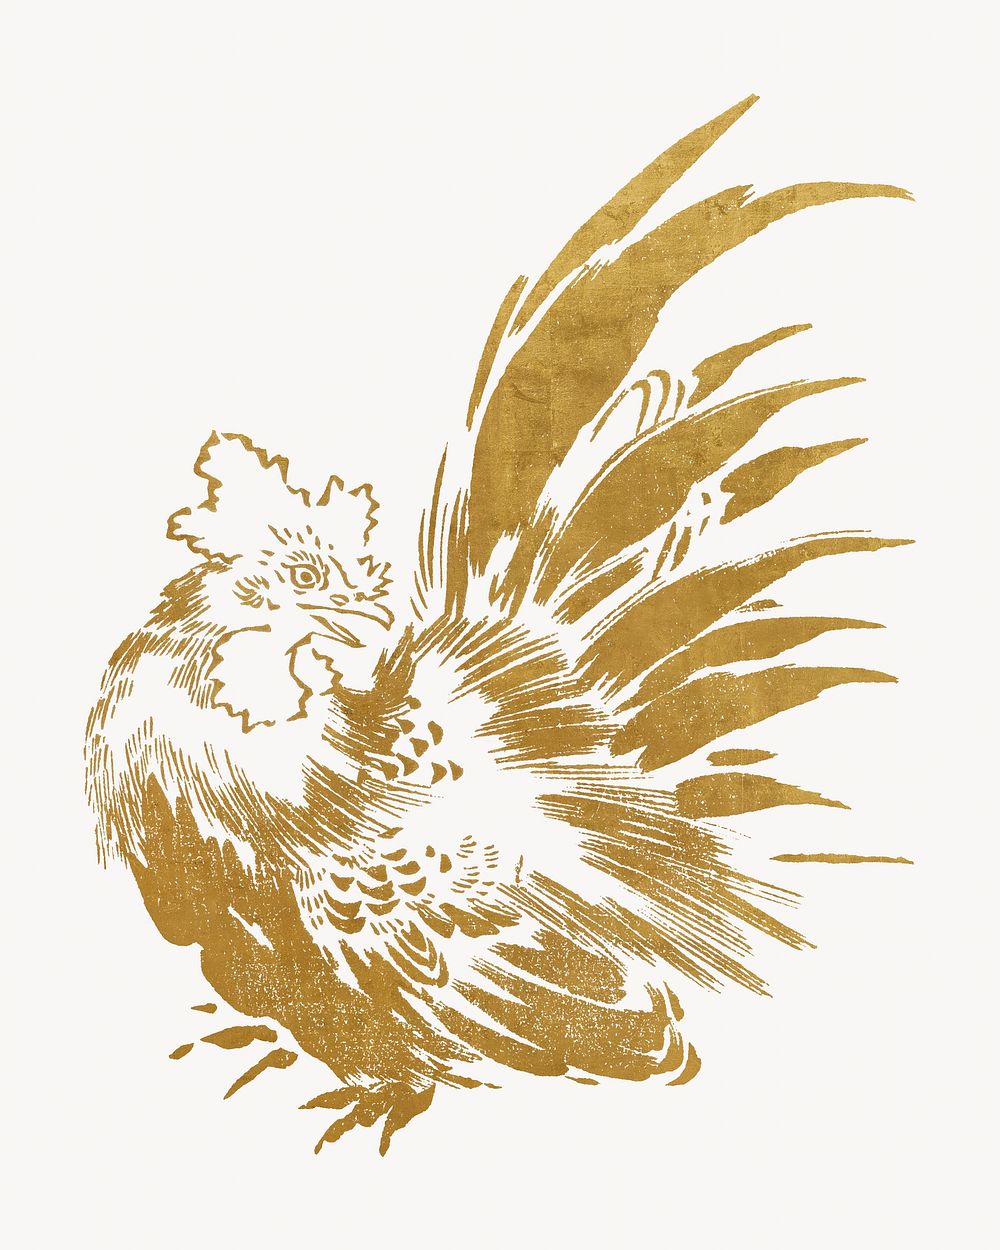 Gold Japanese chicken, animal illustration by Toyeki. Remixed by rawpixel.